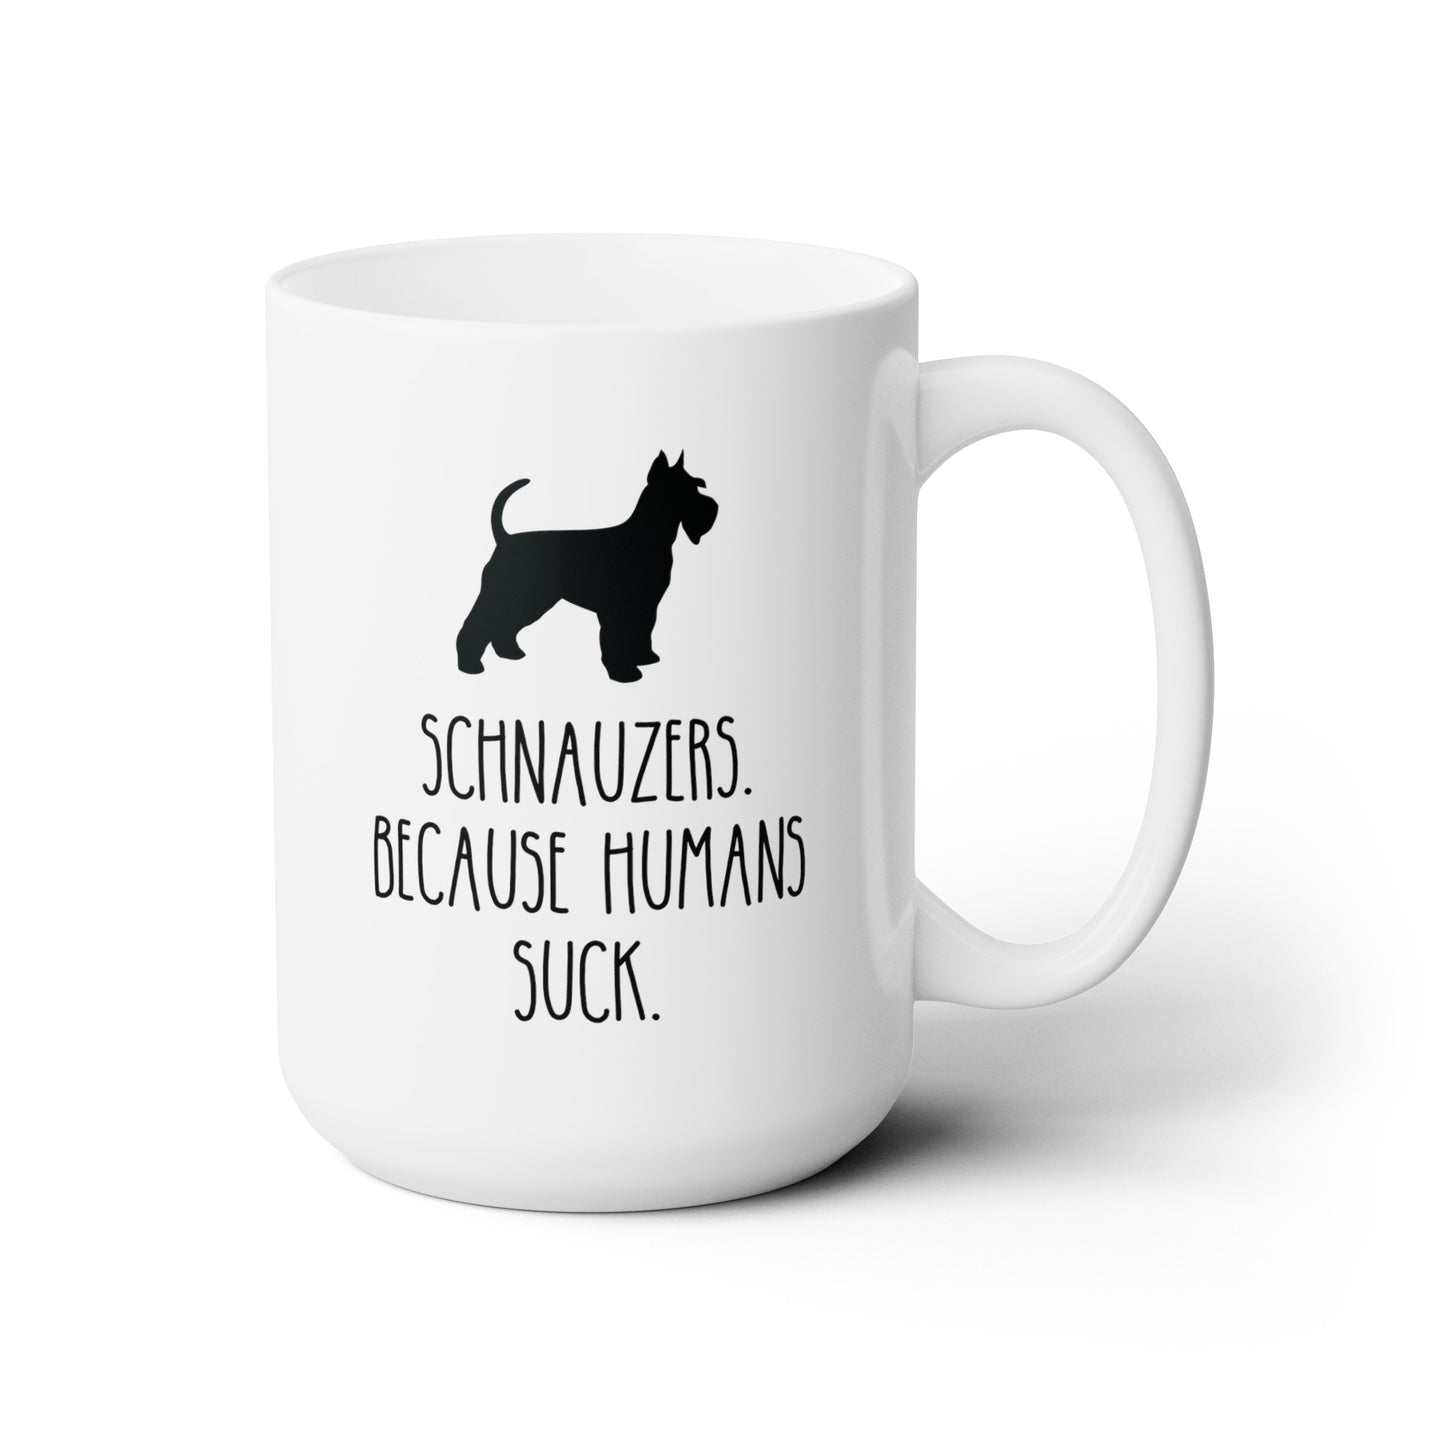 Schnauzers Because Humans Suck 15oz white funny large coffee mug gift for dog mom lover owner furmom waveywares wavey wares wavywares wavy wares